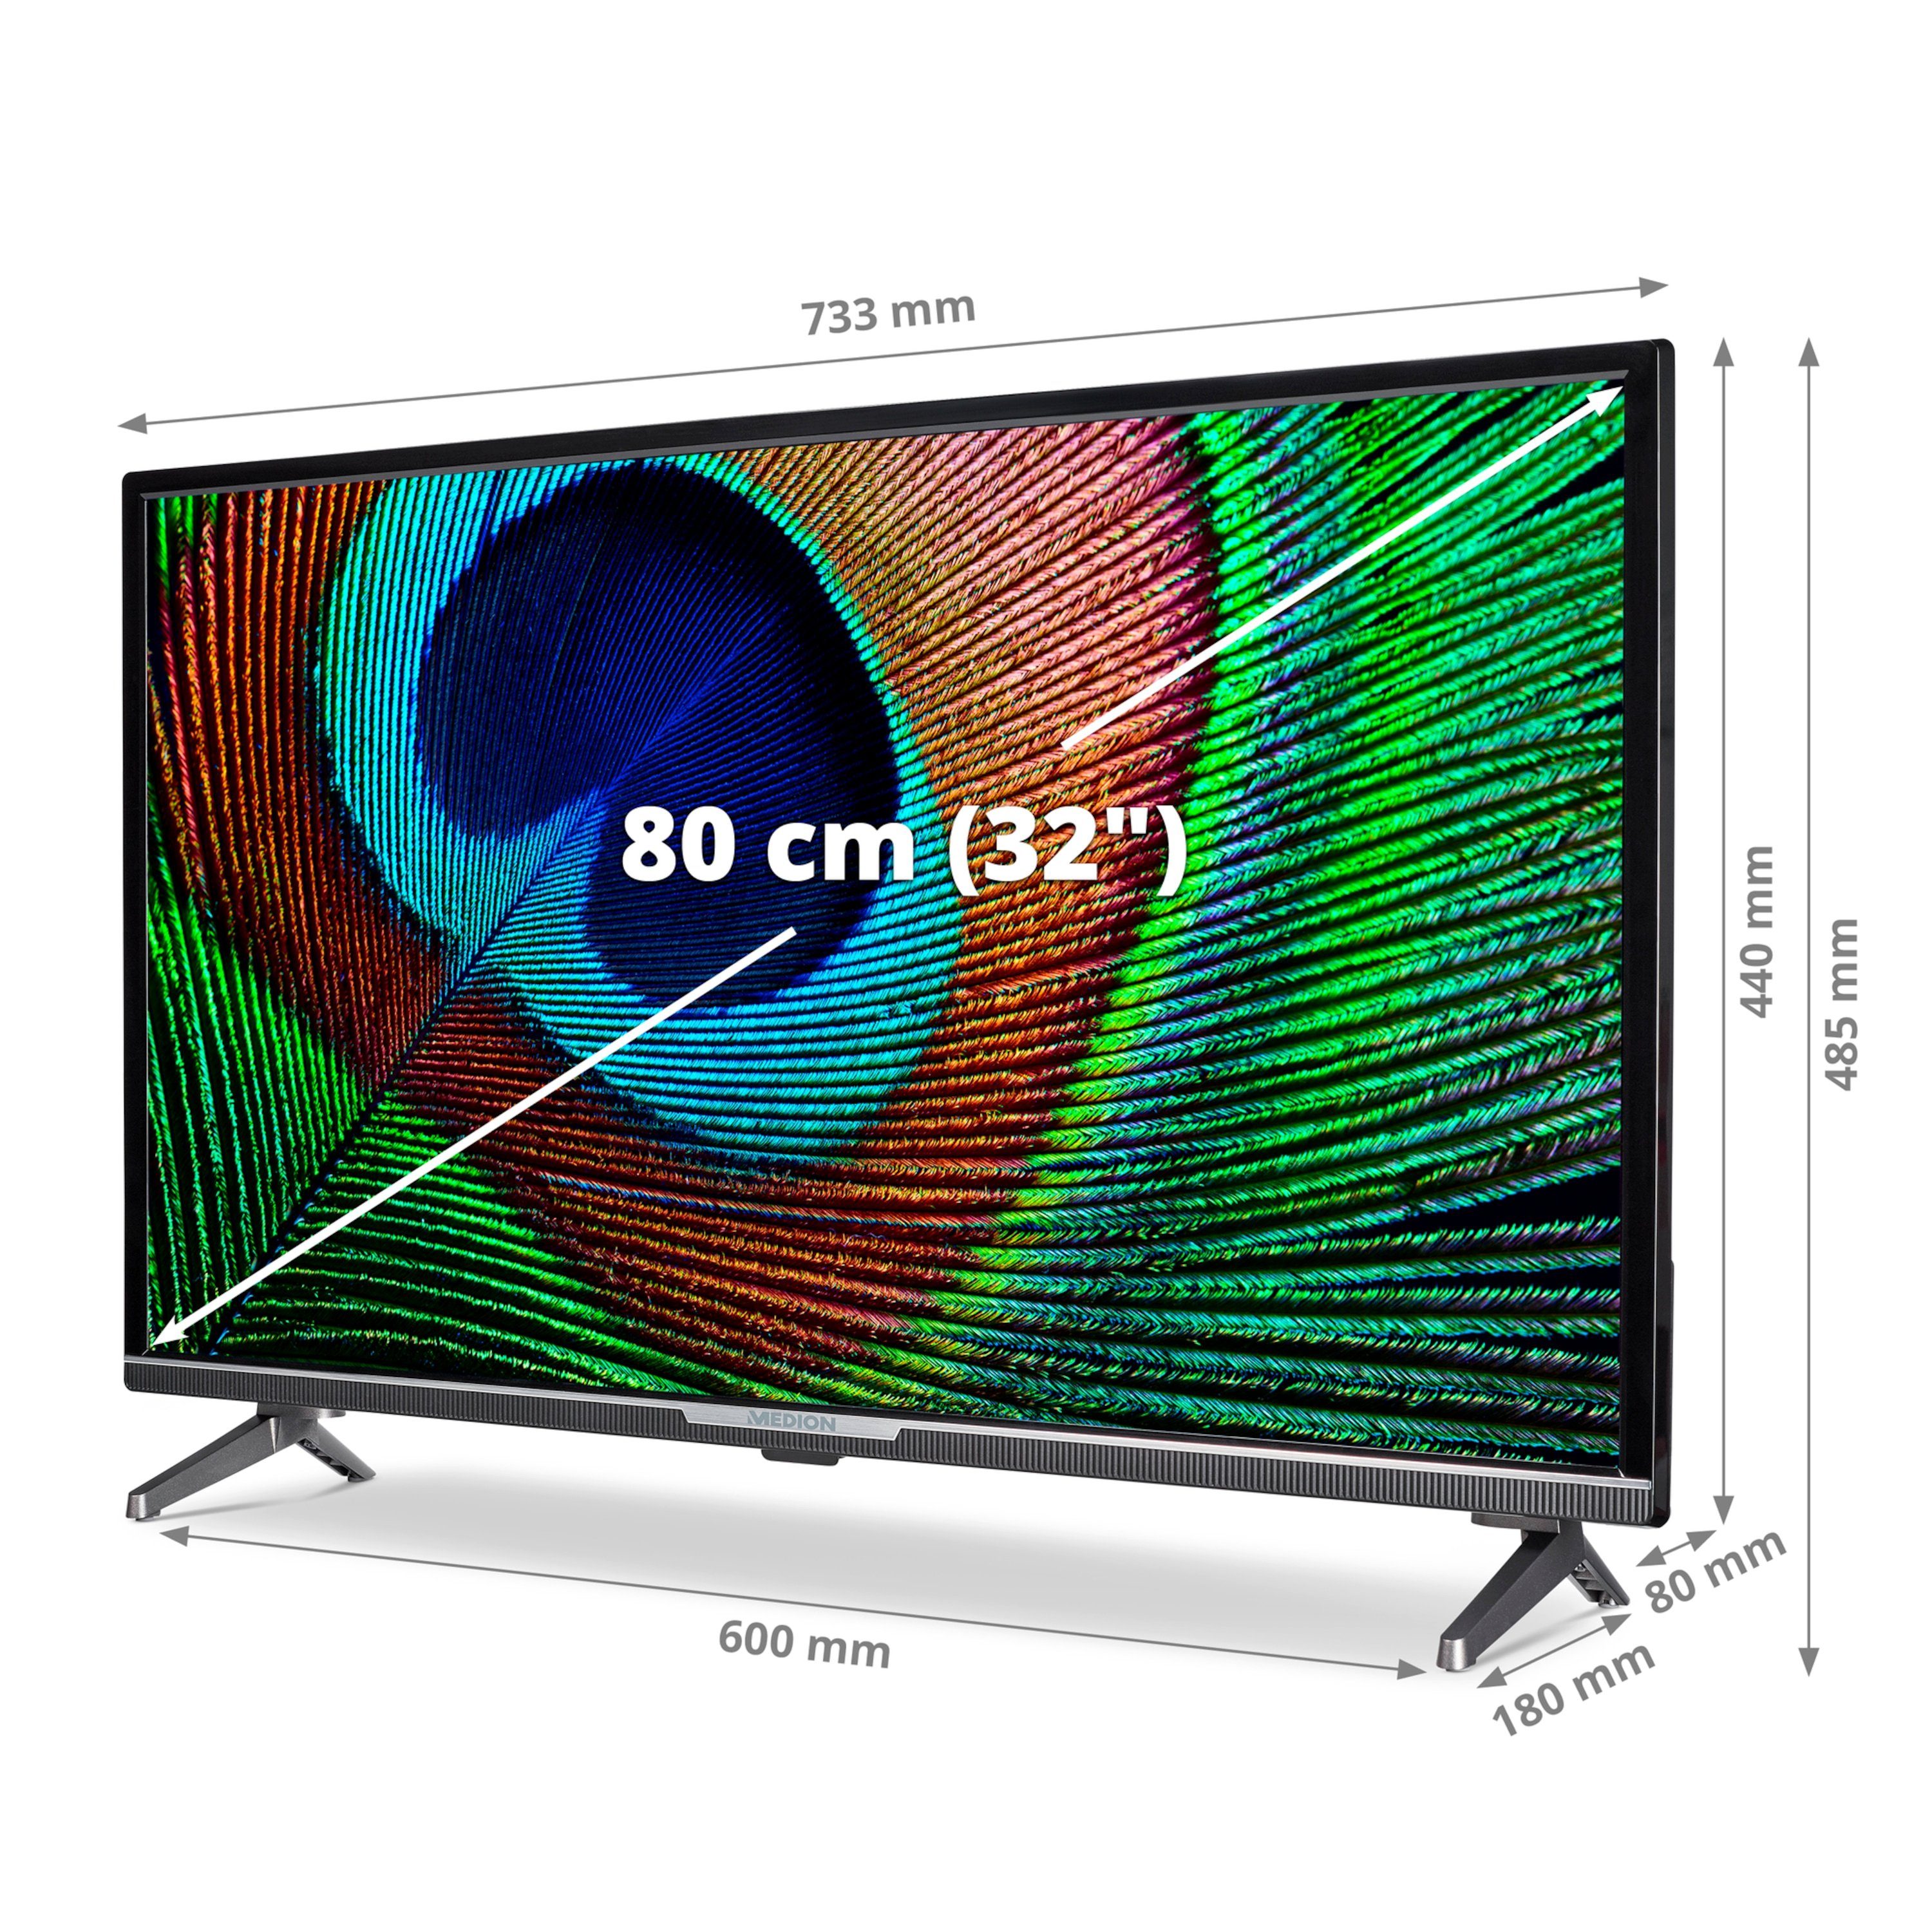 MD30042 Zoll, 60Hz, Display Android TV, MD30042) Full LED-Fernseher Full-HD 1080p HD, Medion® (80 cm/31.5